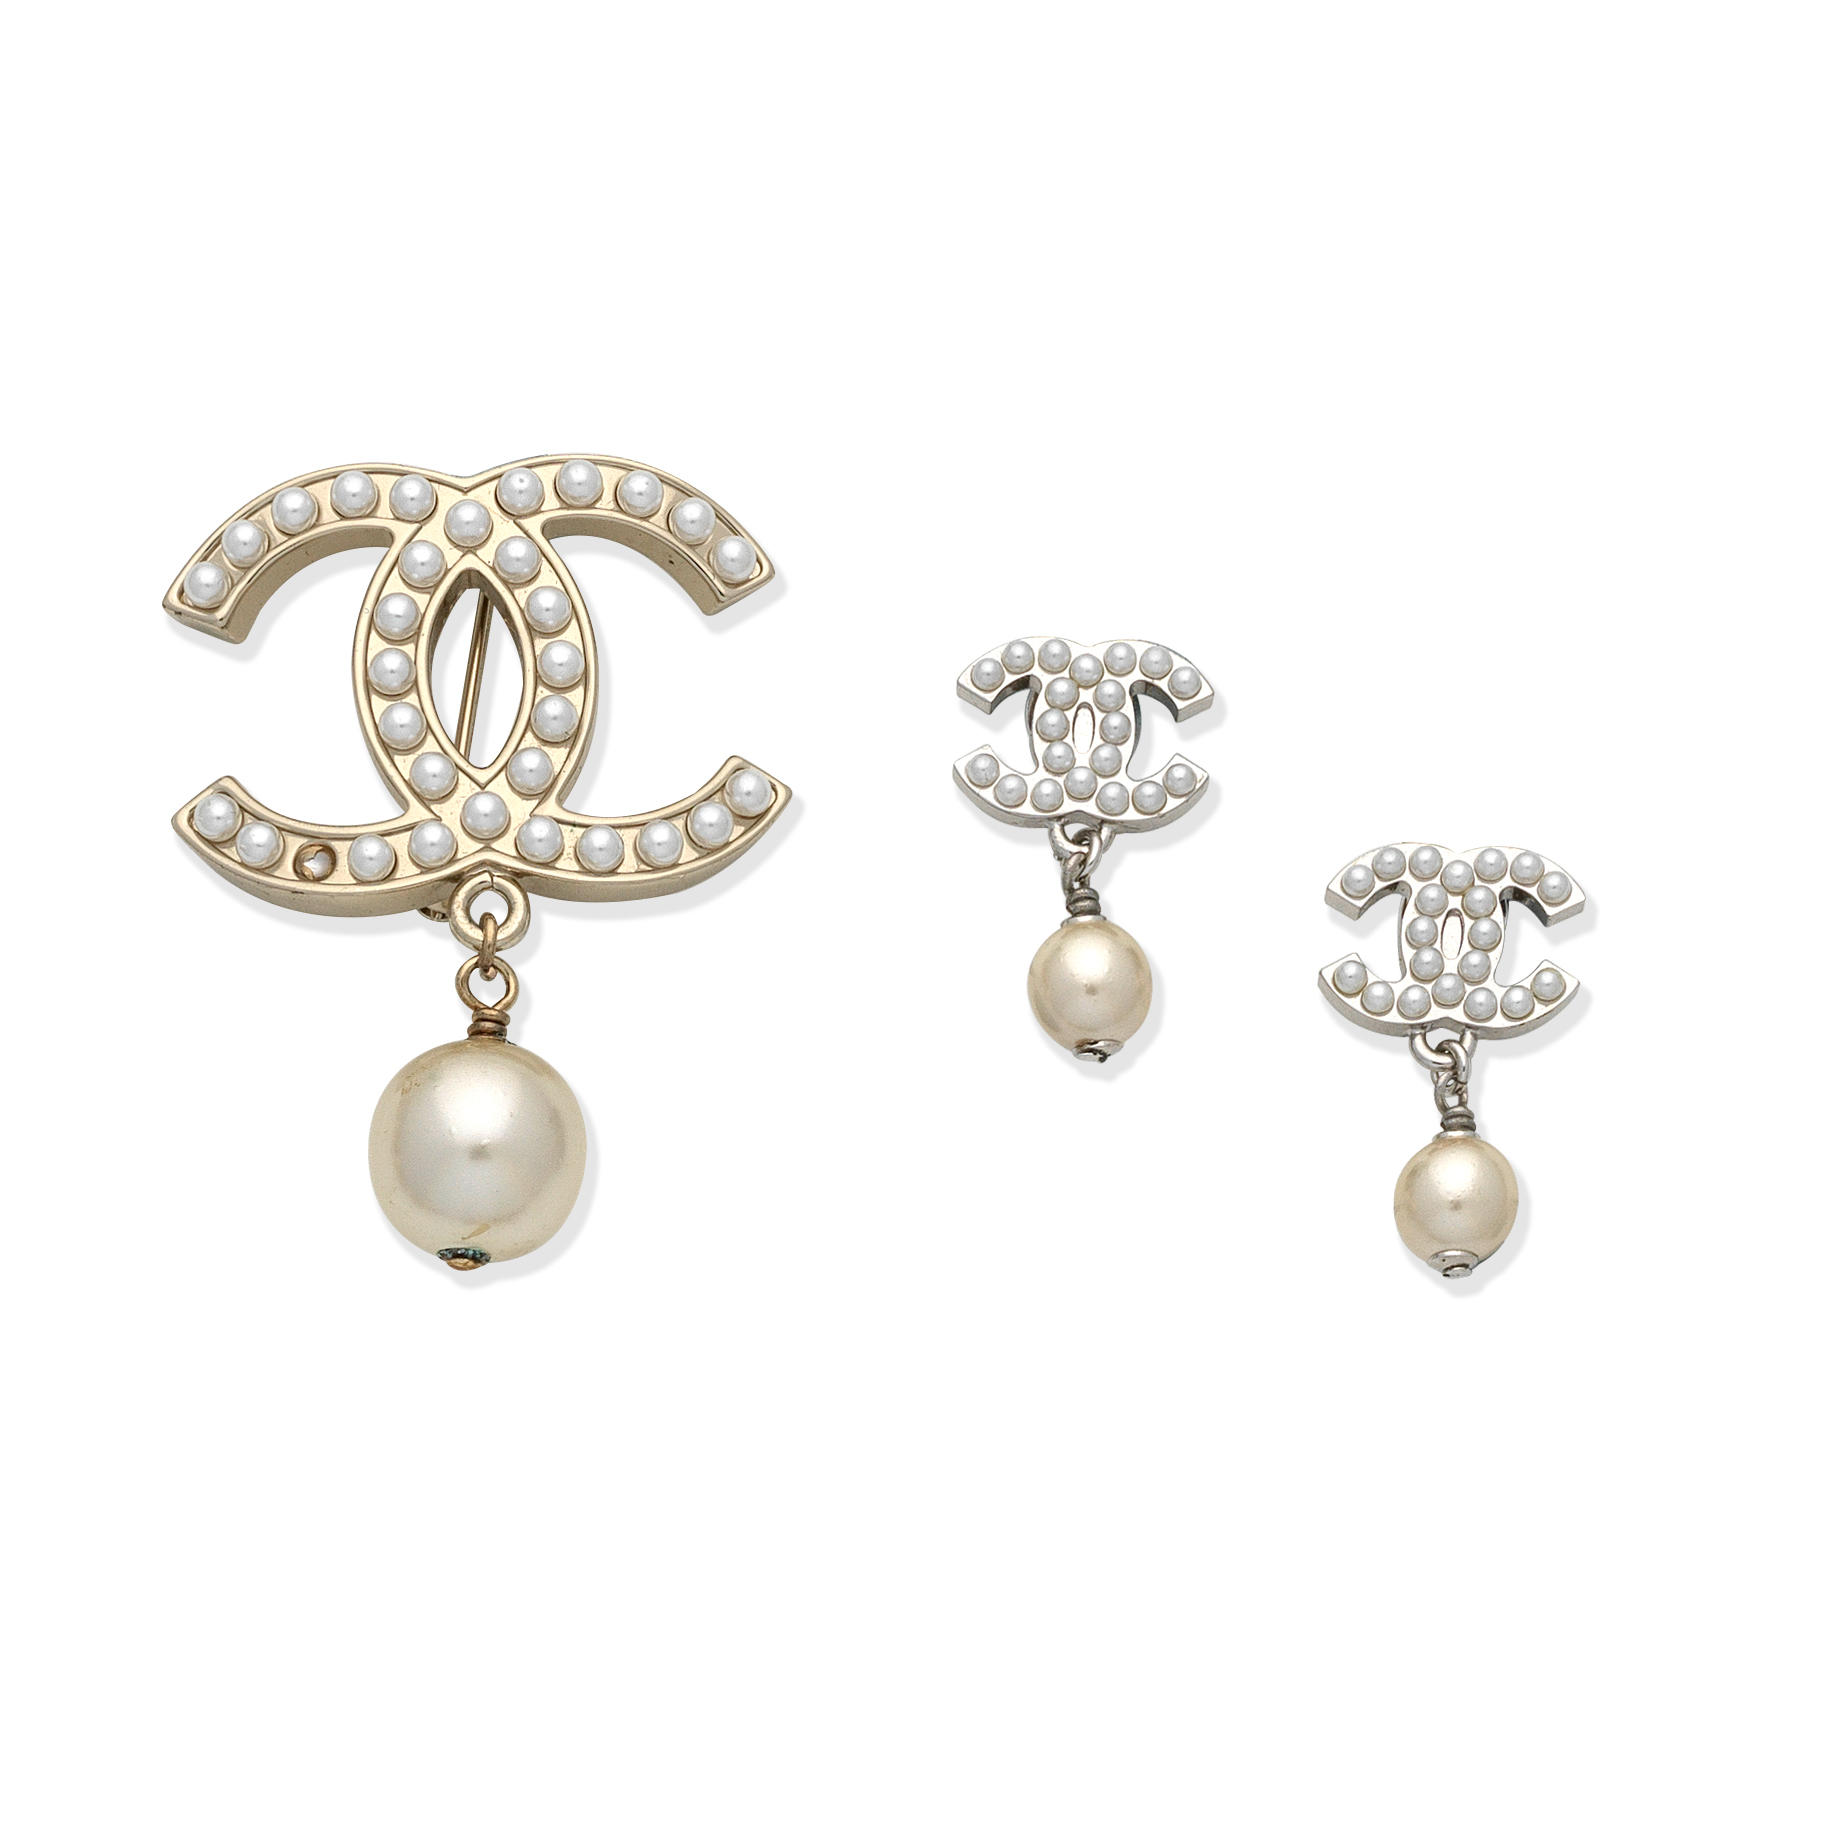 Bonhams : CHANEL A CC AND SIMULATED PEARL MATCHED BROOCH AND EARRING SET  2004 and 2005 (Includes box)